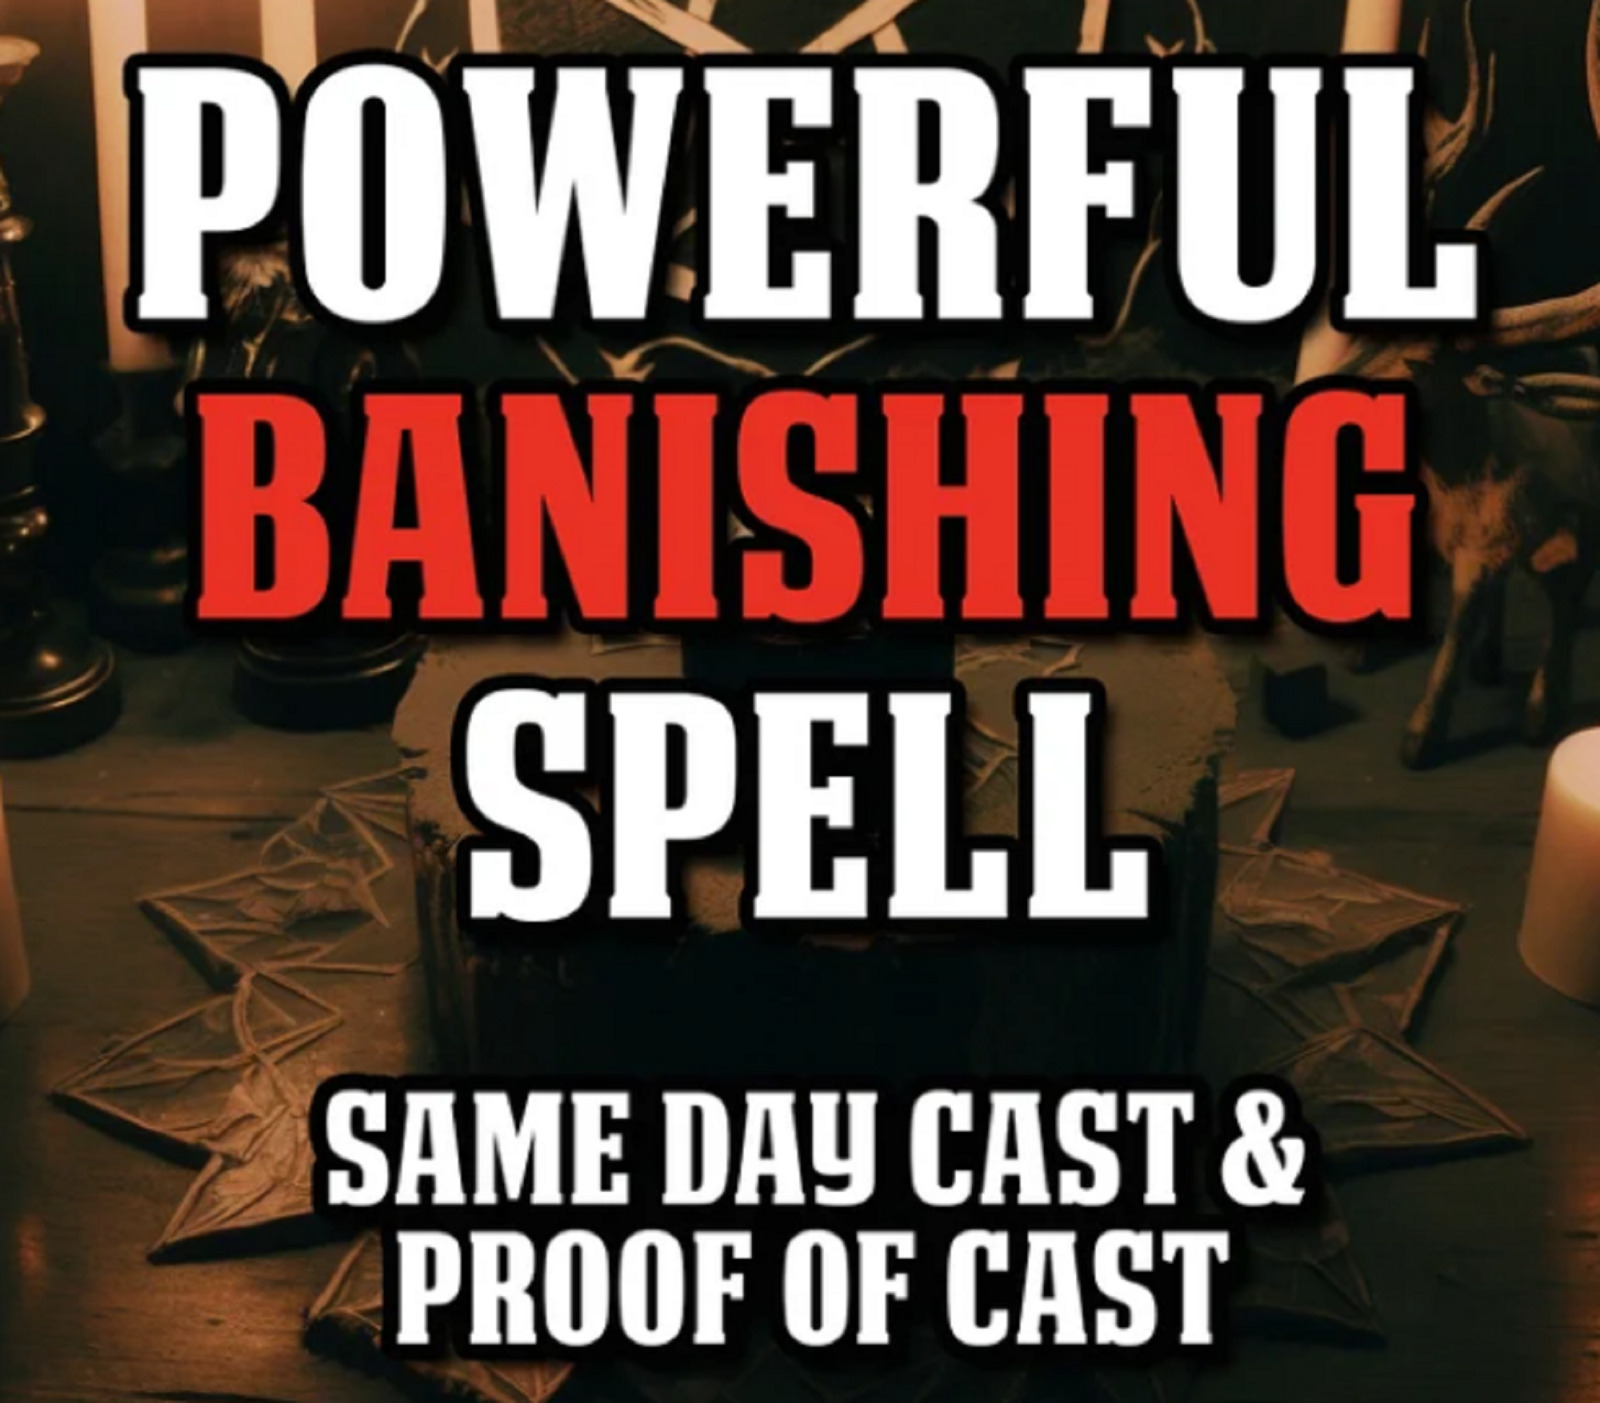 Powerful BANISHING SPELL - Banish Someone Or Something, Same Day, Fast Results